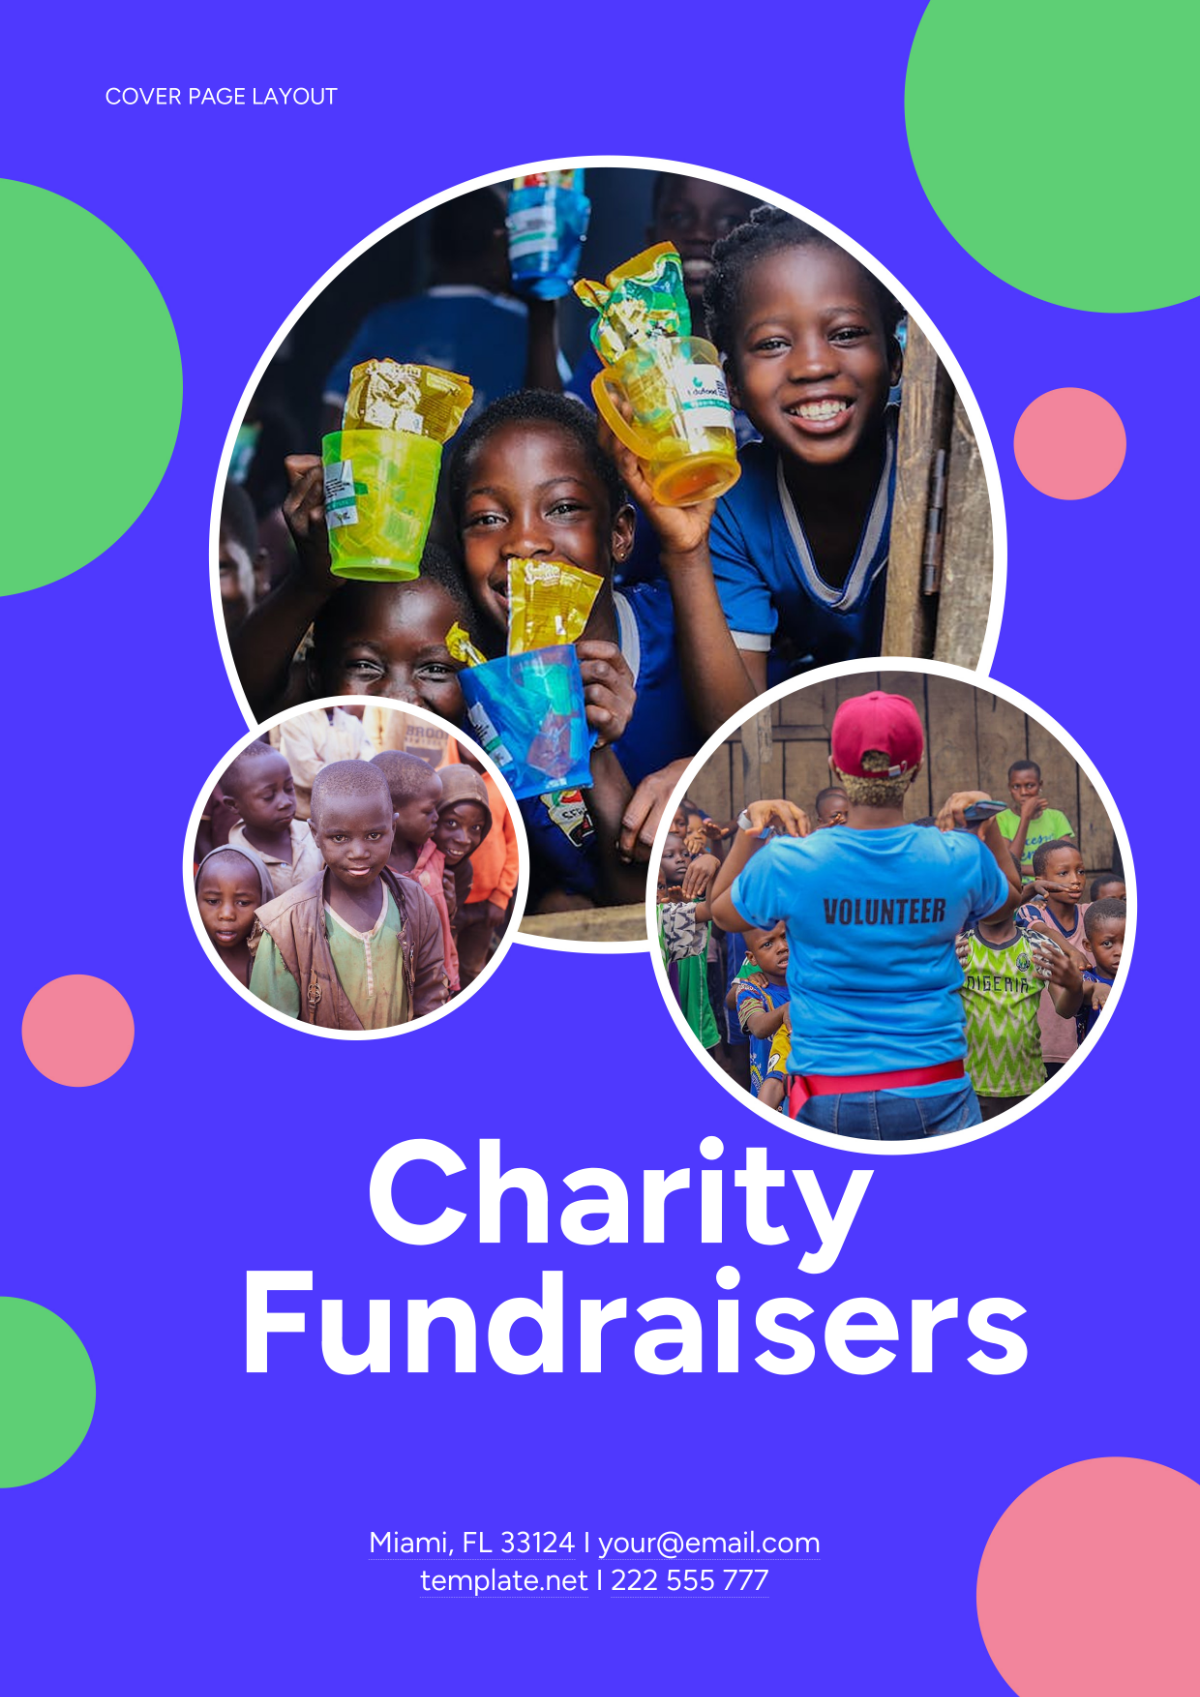 Charity Fundraiser Cover Page Layout Template